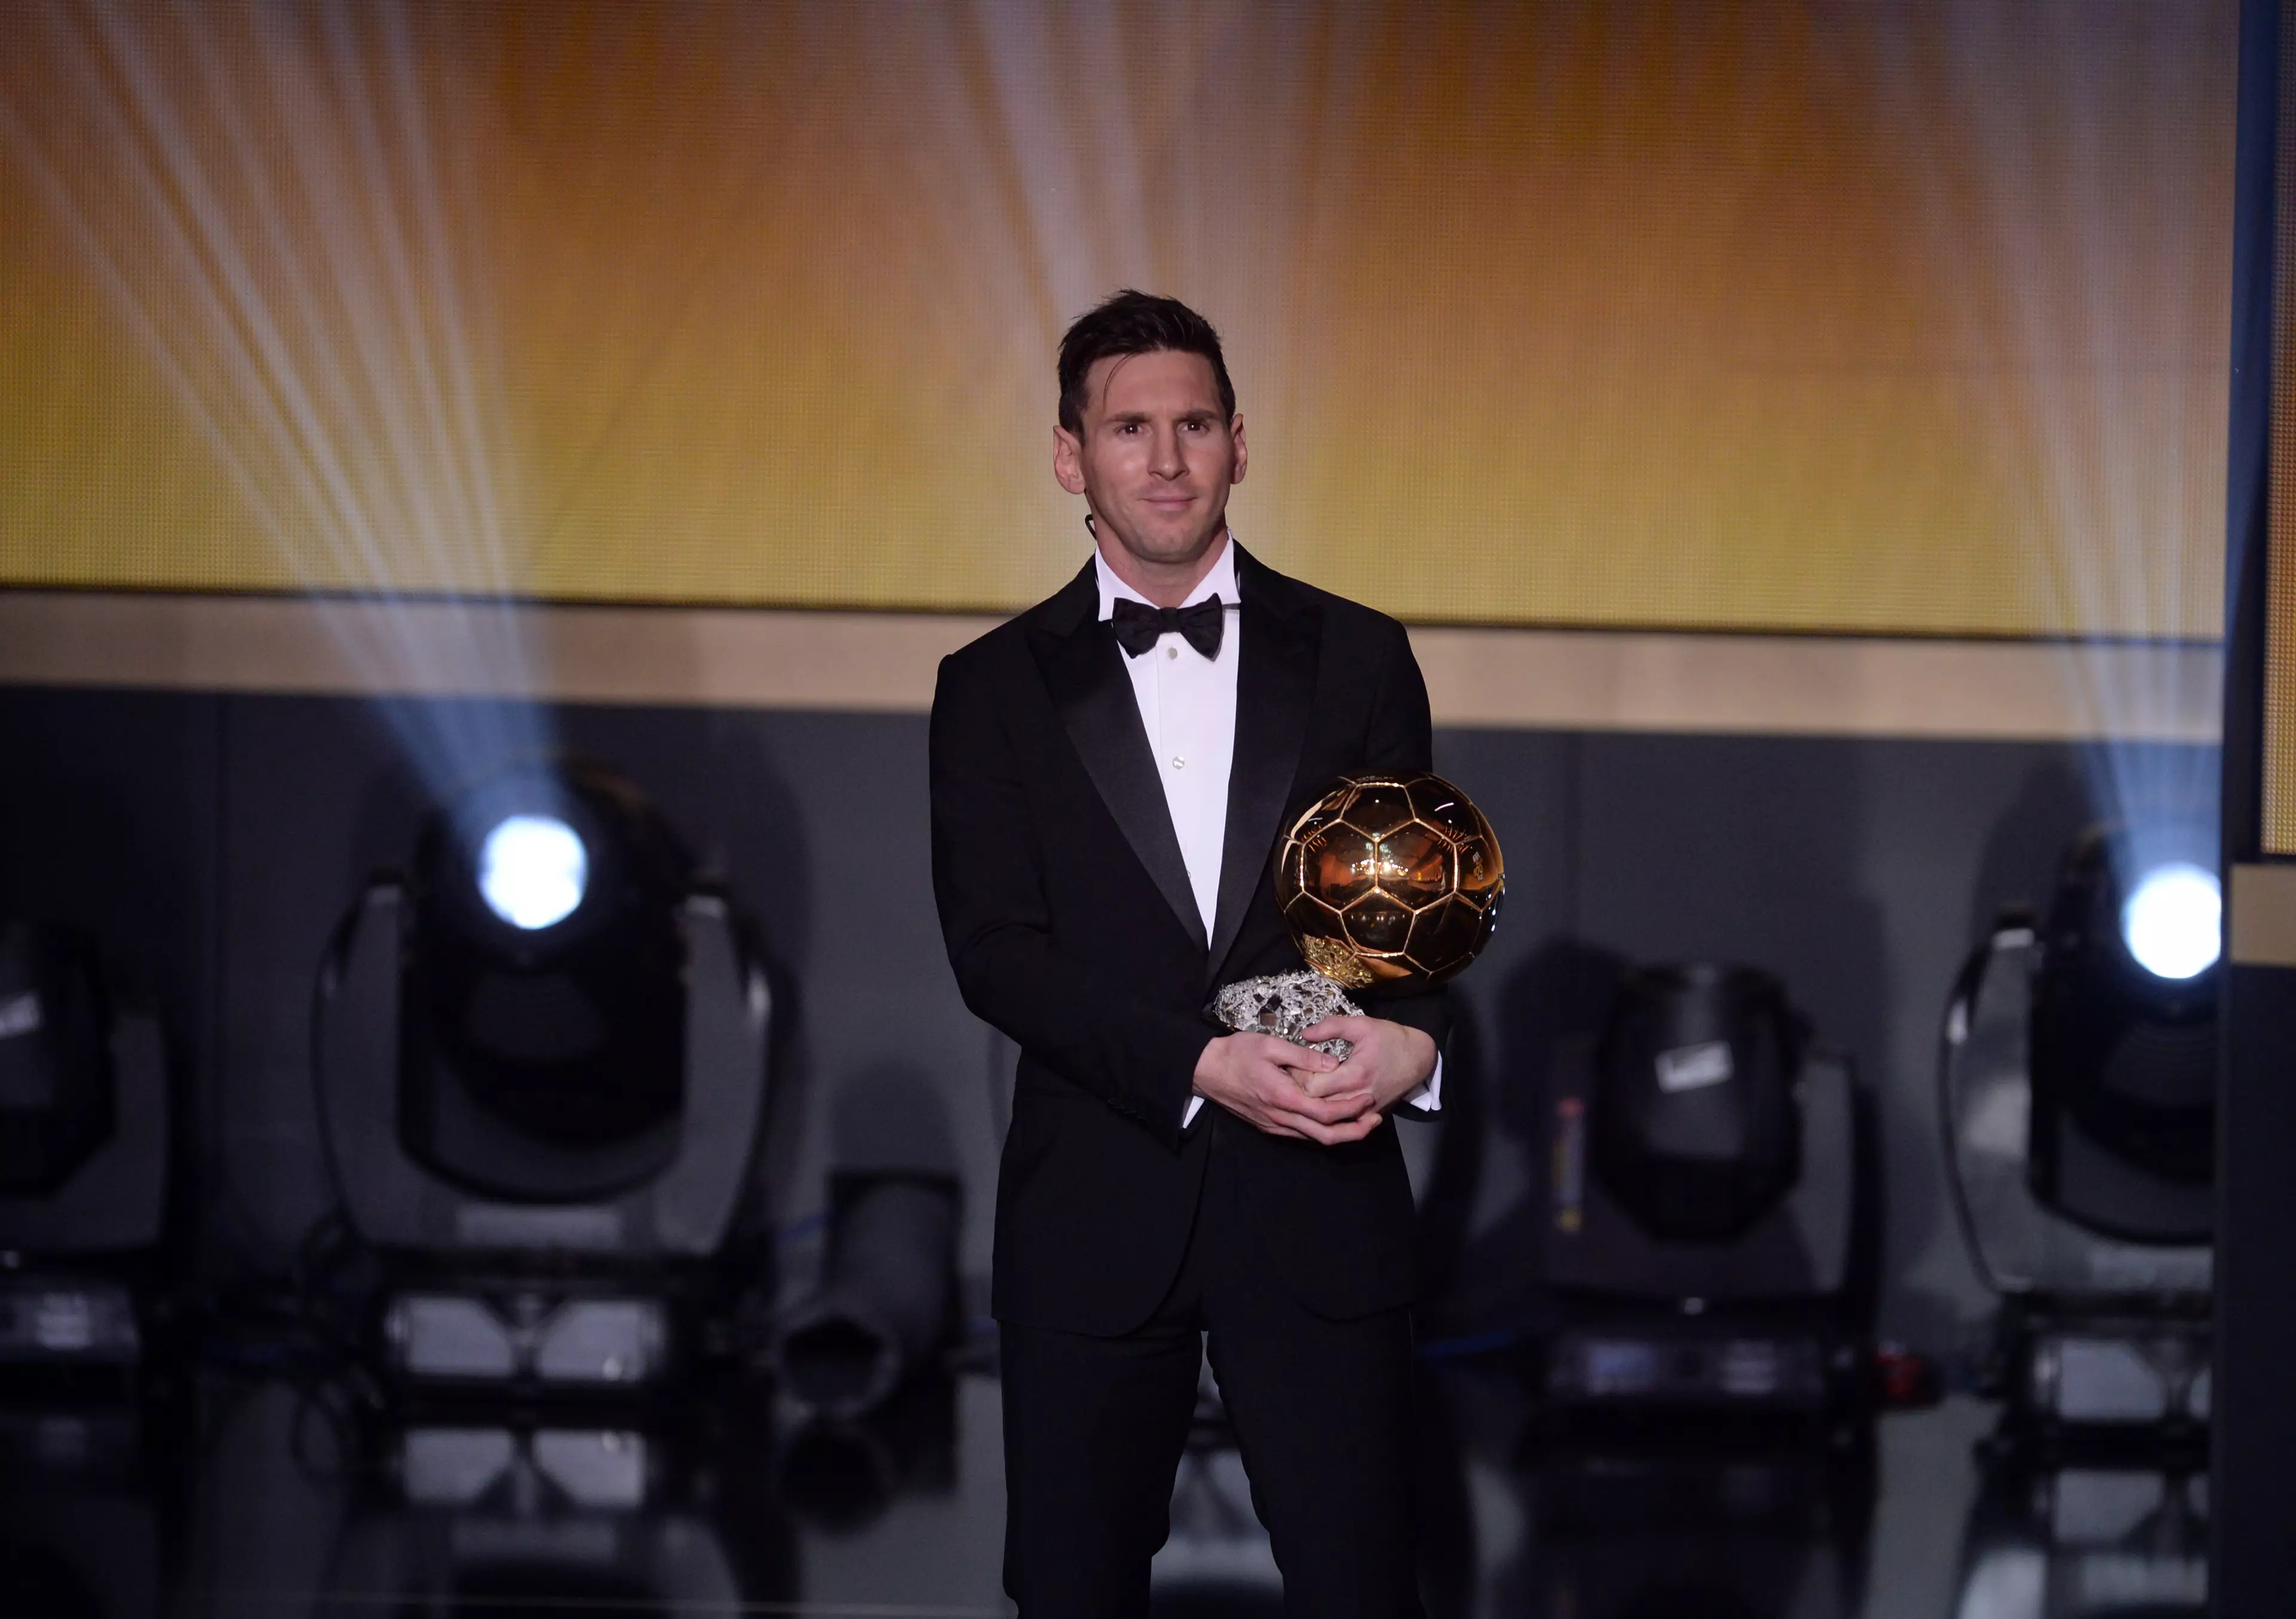 Messi is a five time Ballon d'Or winner. Image: PA Images